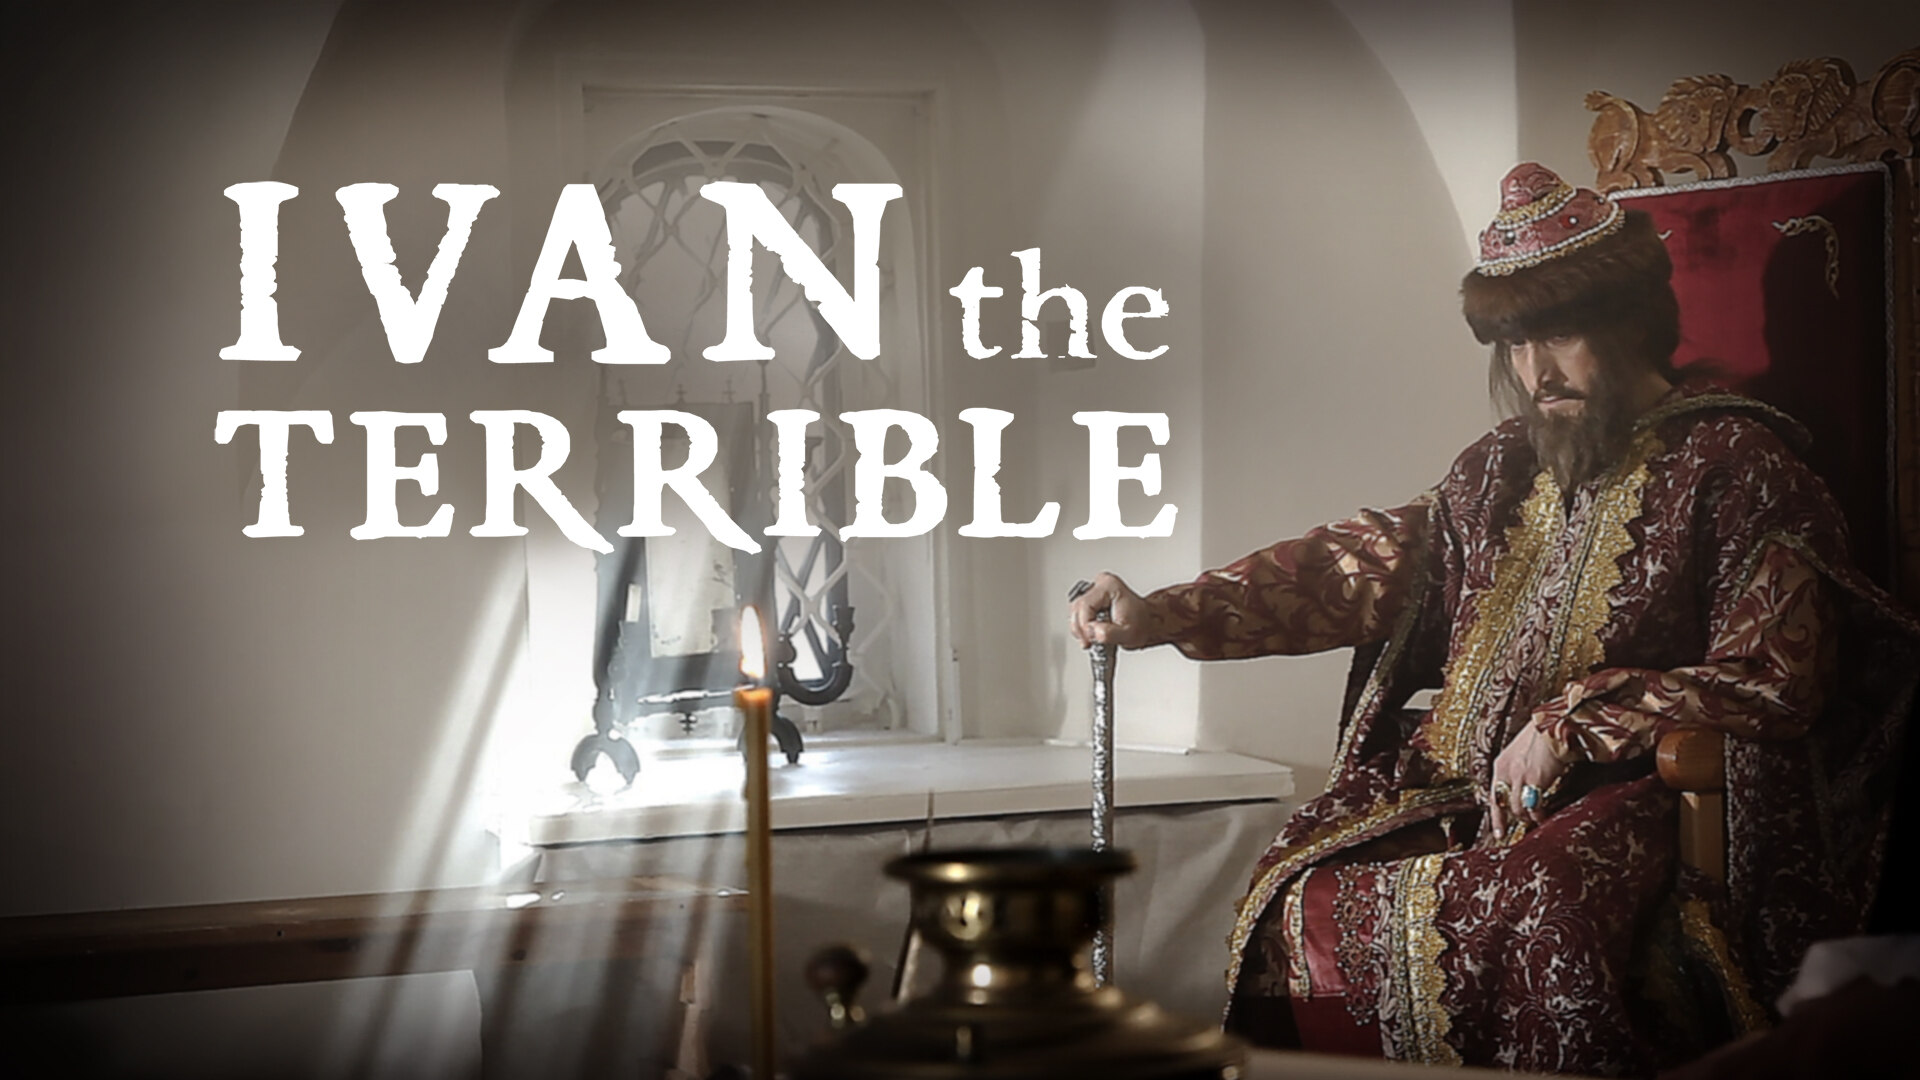 30-facts-about-the-movie-ivan-the-terrible